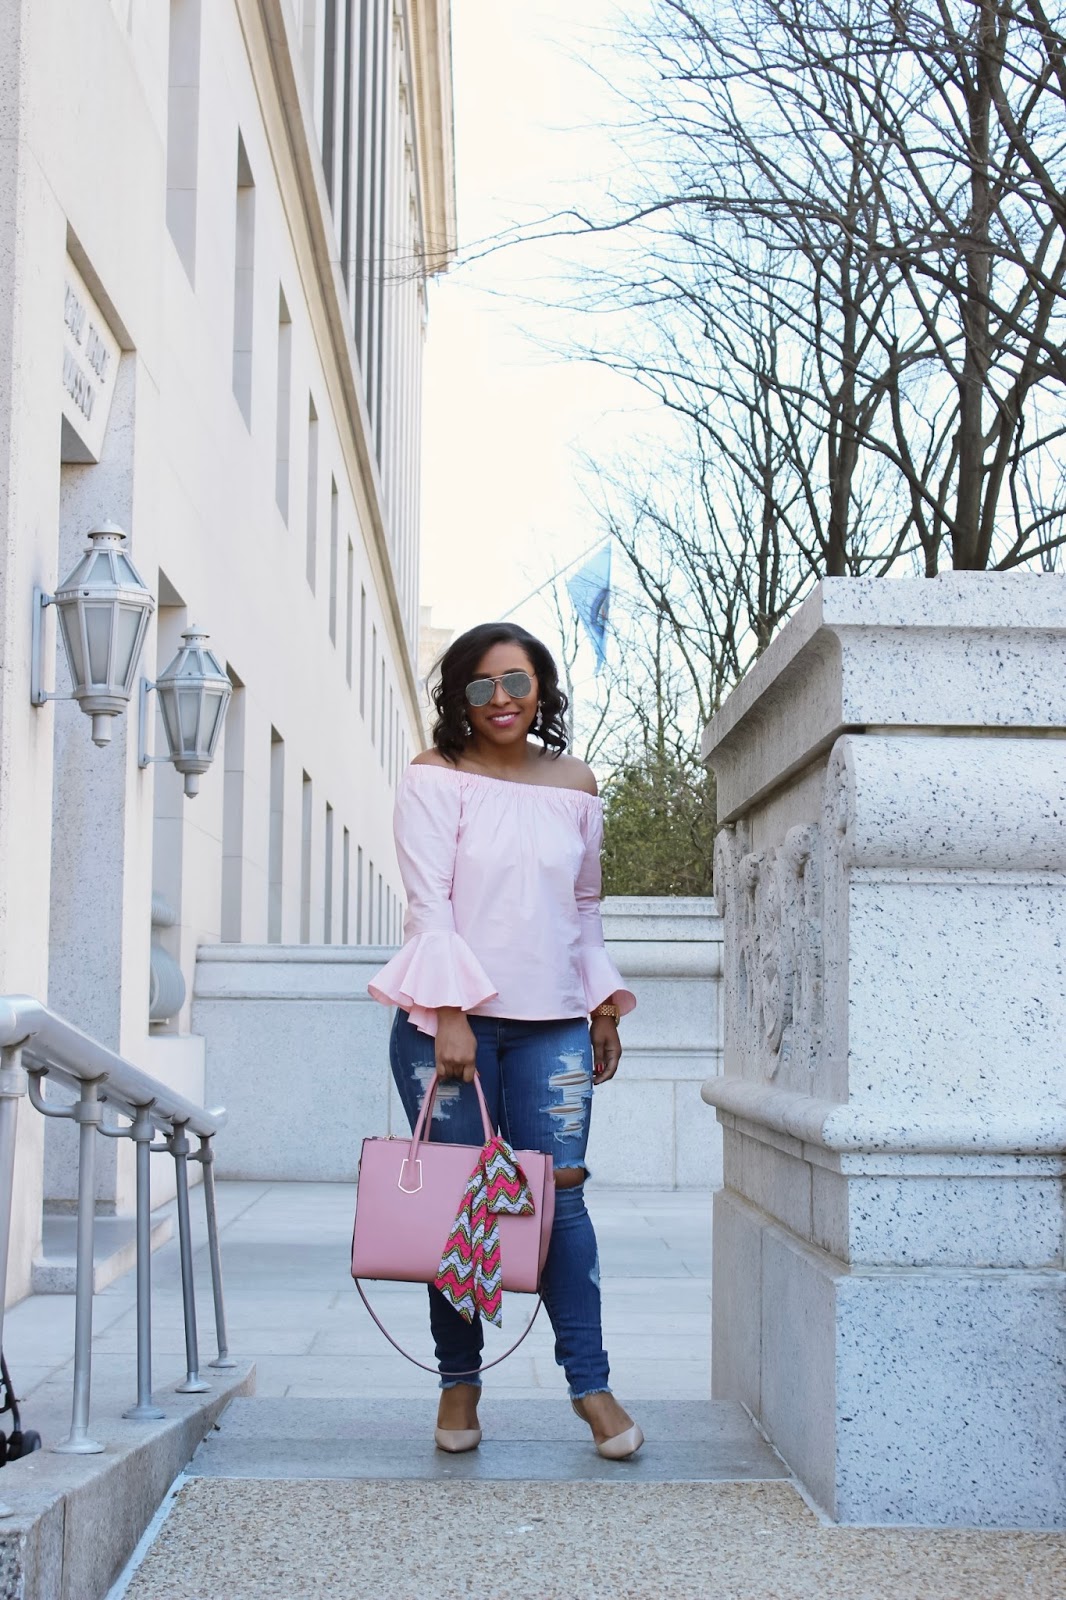 Are Your Sleeves Making A Statement? bell sleeves, off the shoulder top, cold shoulder, pink off the shoulder top, statement sleeves, new trends, fashion trends, statement top, pink top, fashon blogger, pink outfits, ripped denim